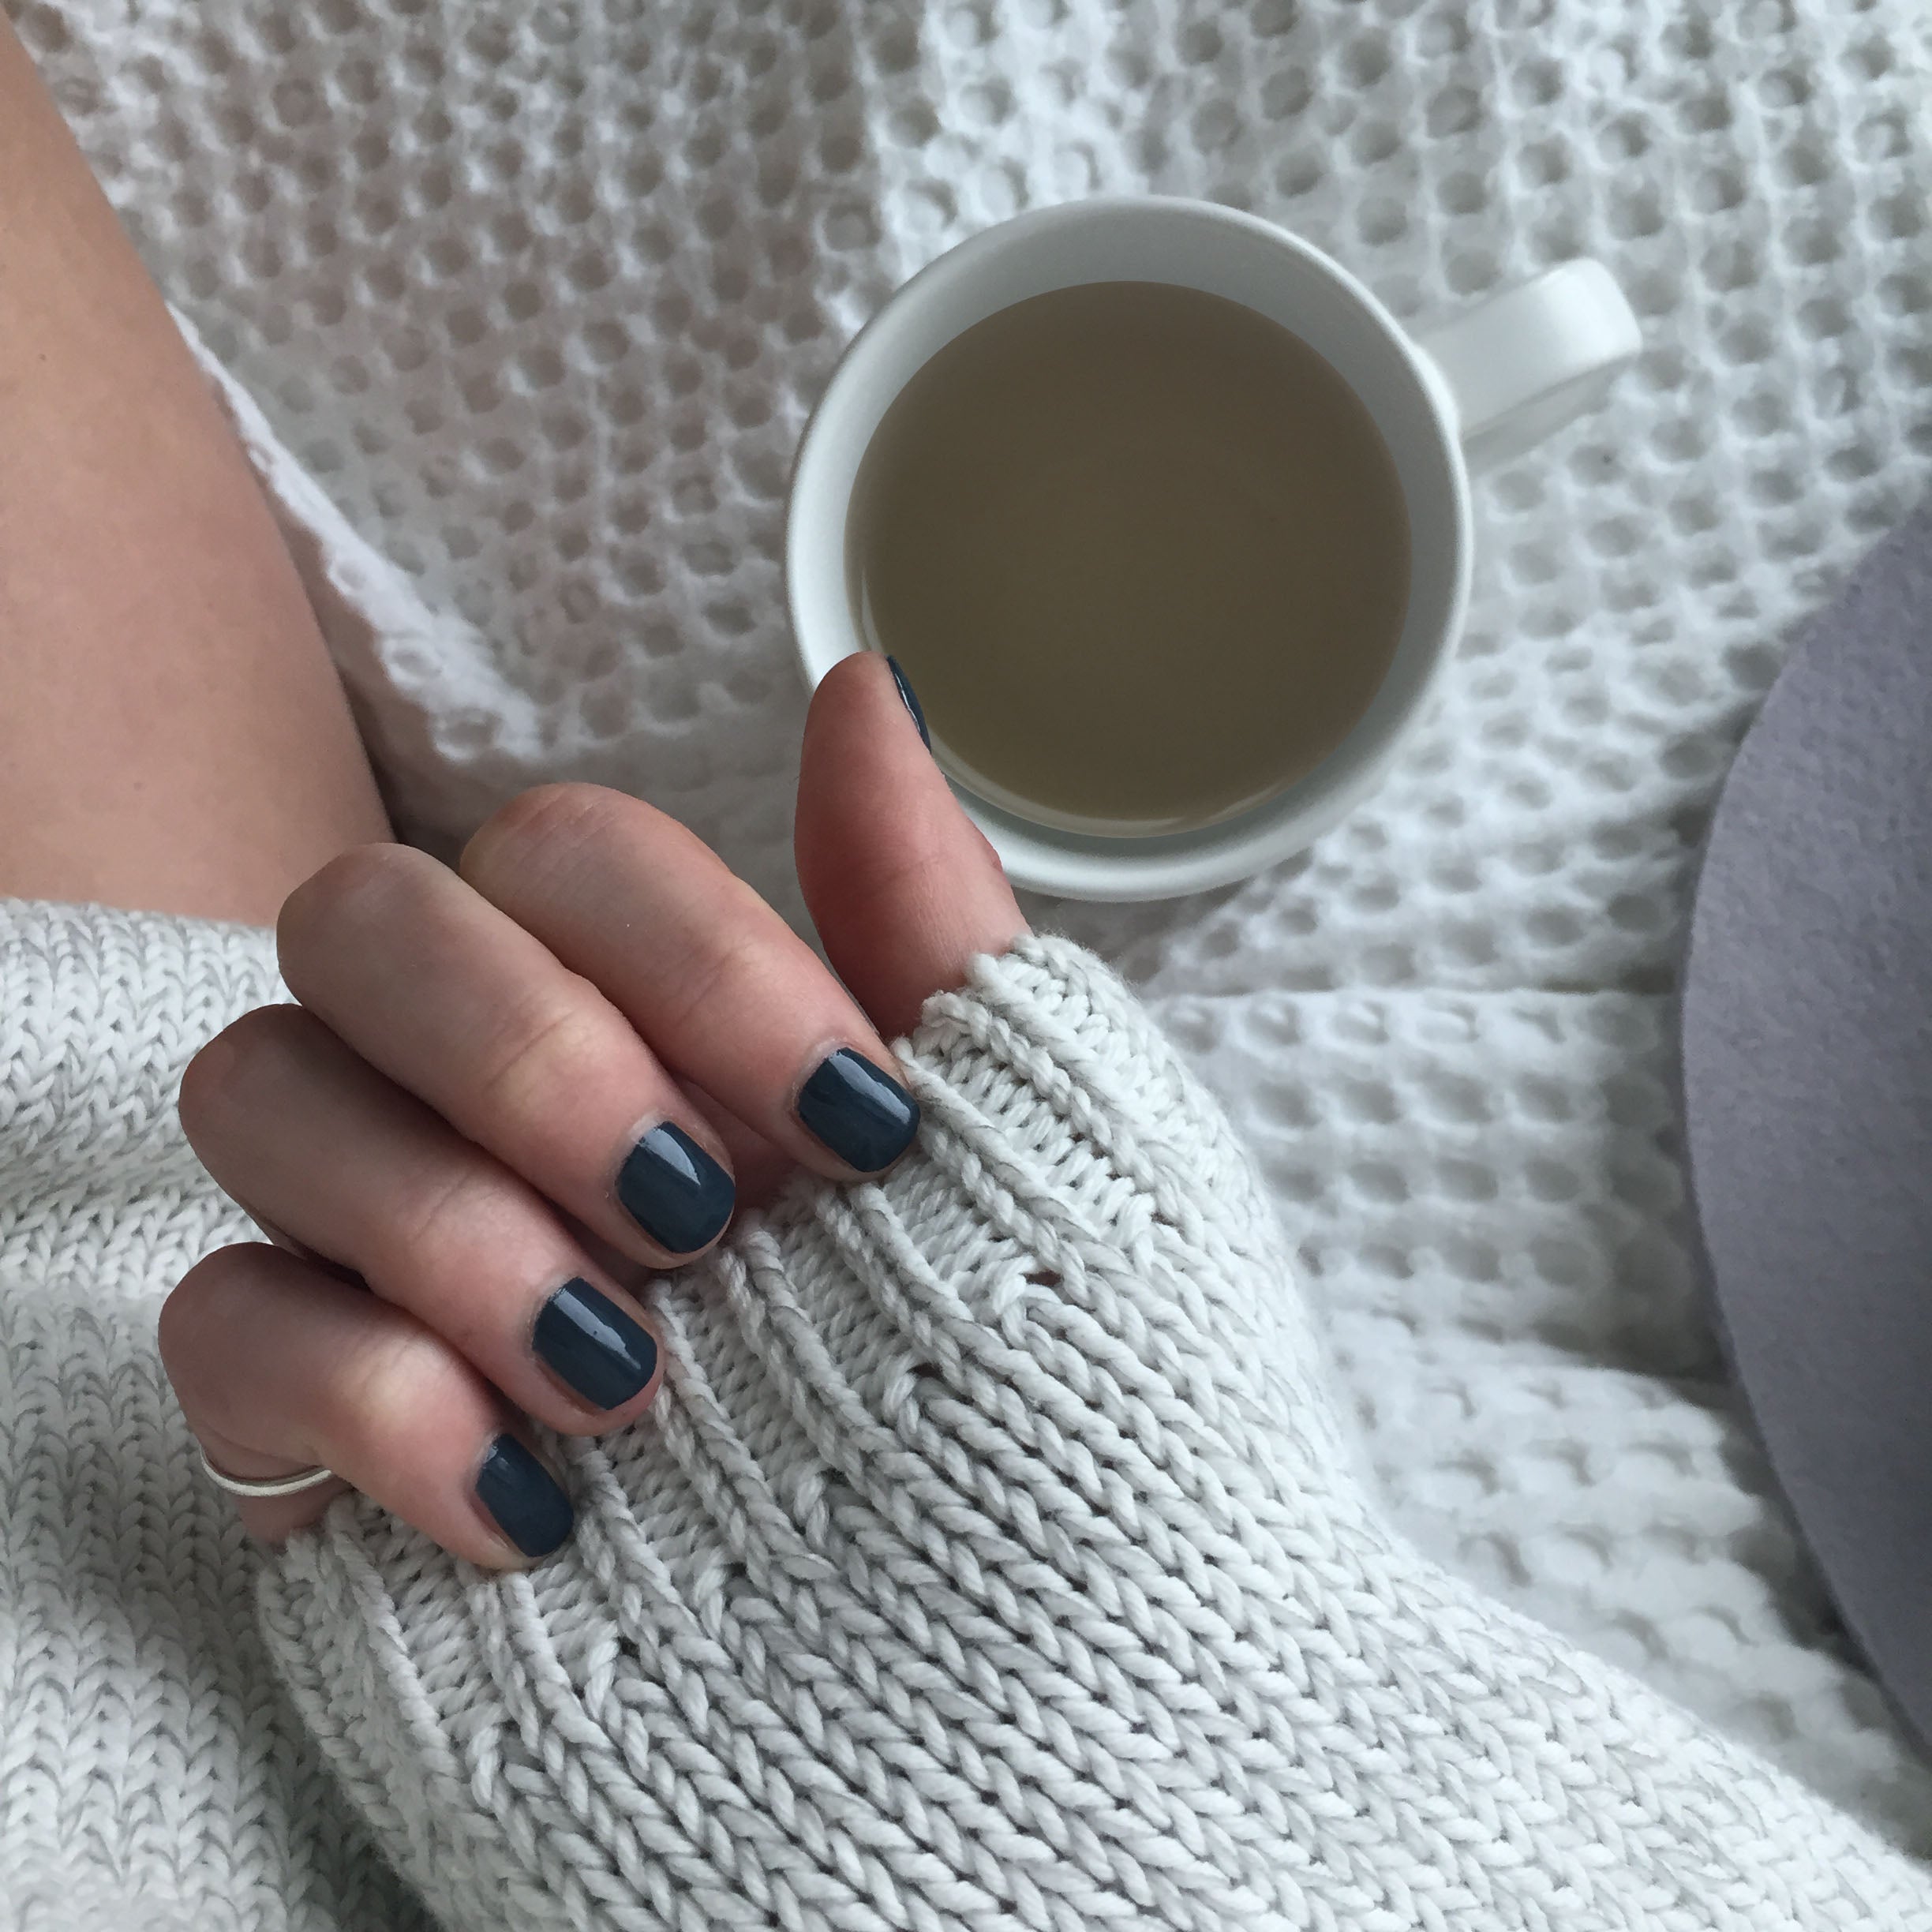 A female clutching the sleeve of her white woolen sweater wearing Storm Grey, a dark blue grey nail polish with green undertones. Constrasting to her cup of tea and blanket in the background.